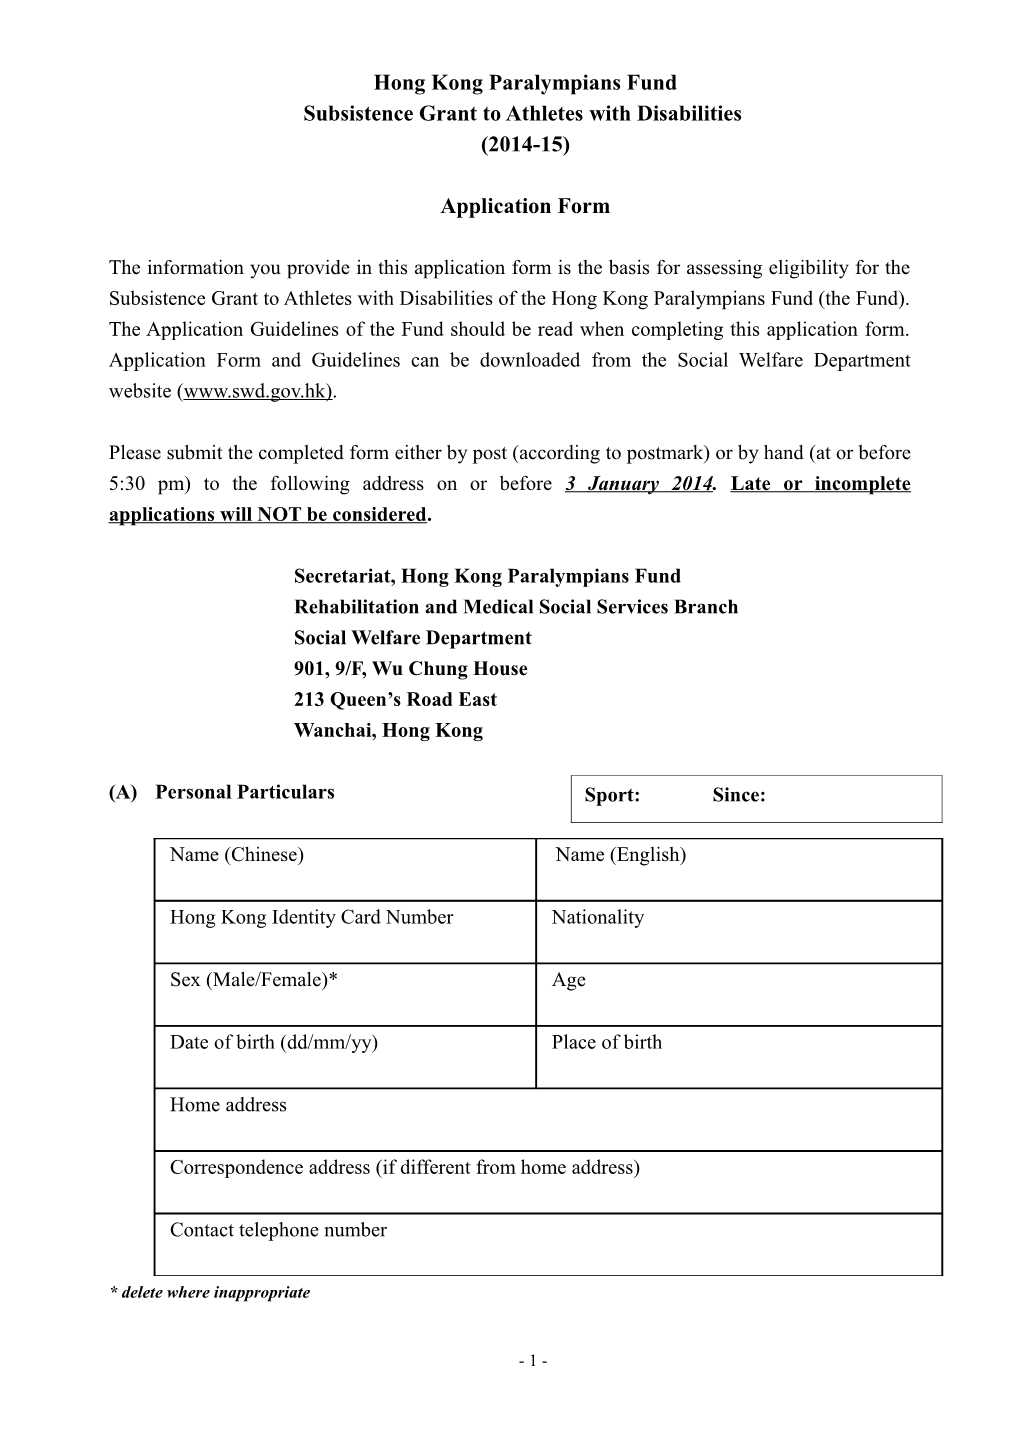 Application Form Subsistence Grant 2014-15